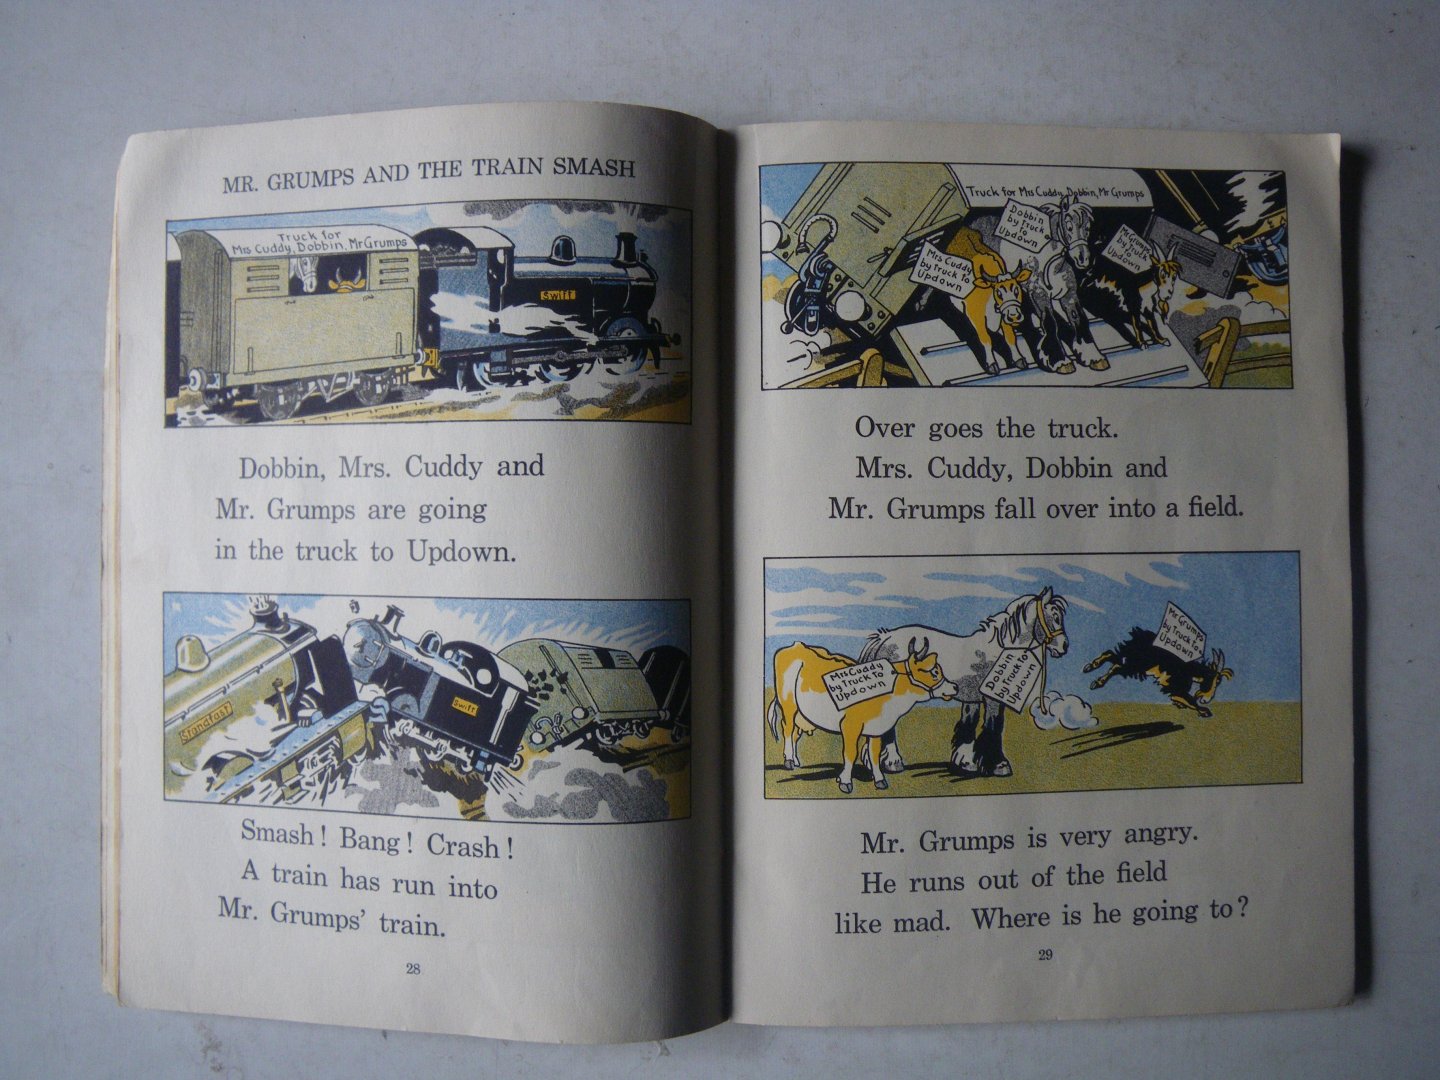 E.H. GRASSHAM , illustrated by Hugh Radcliffe Wilson - The BEACON Reading series old lob approach - book one THE MOVE